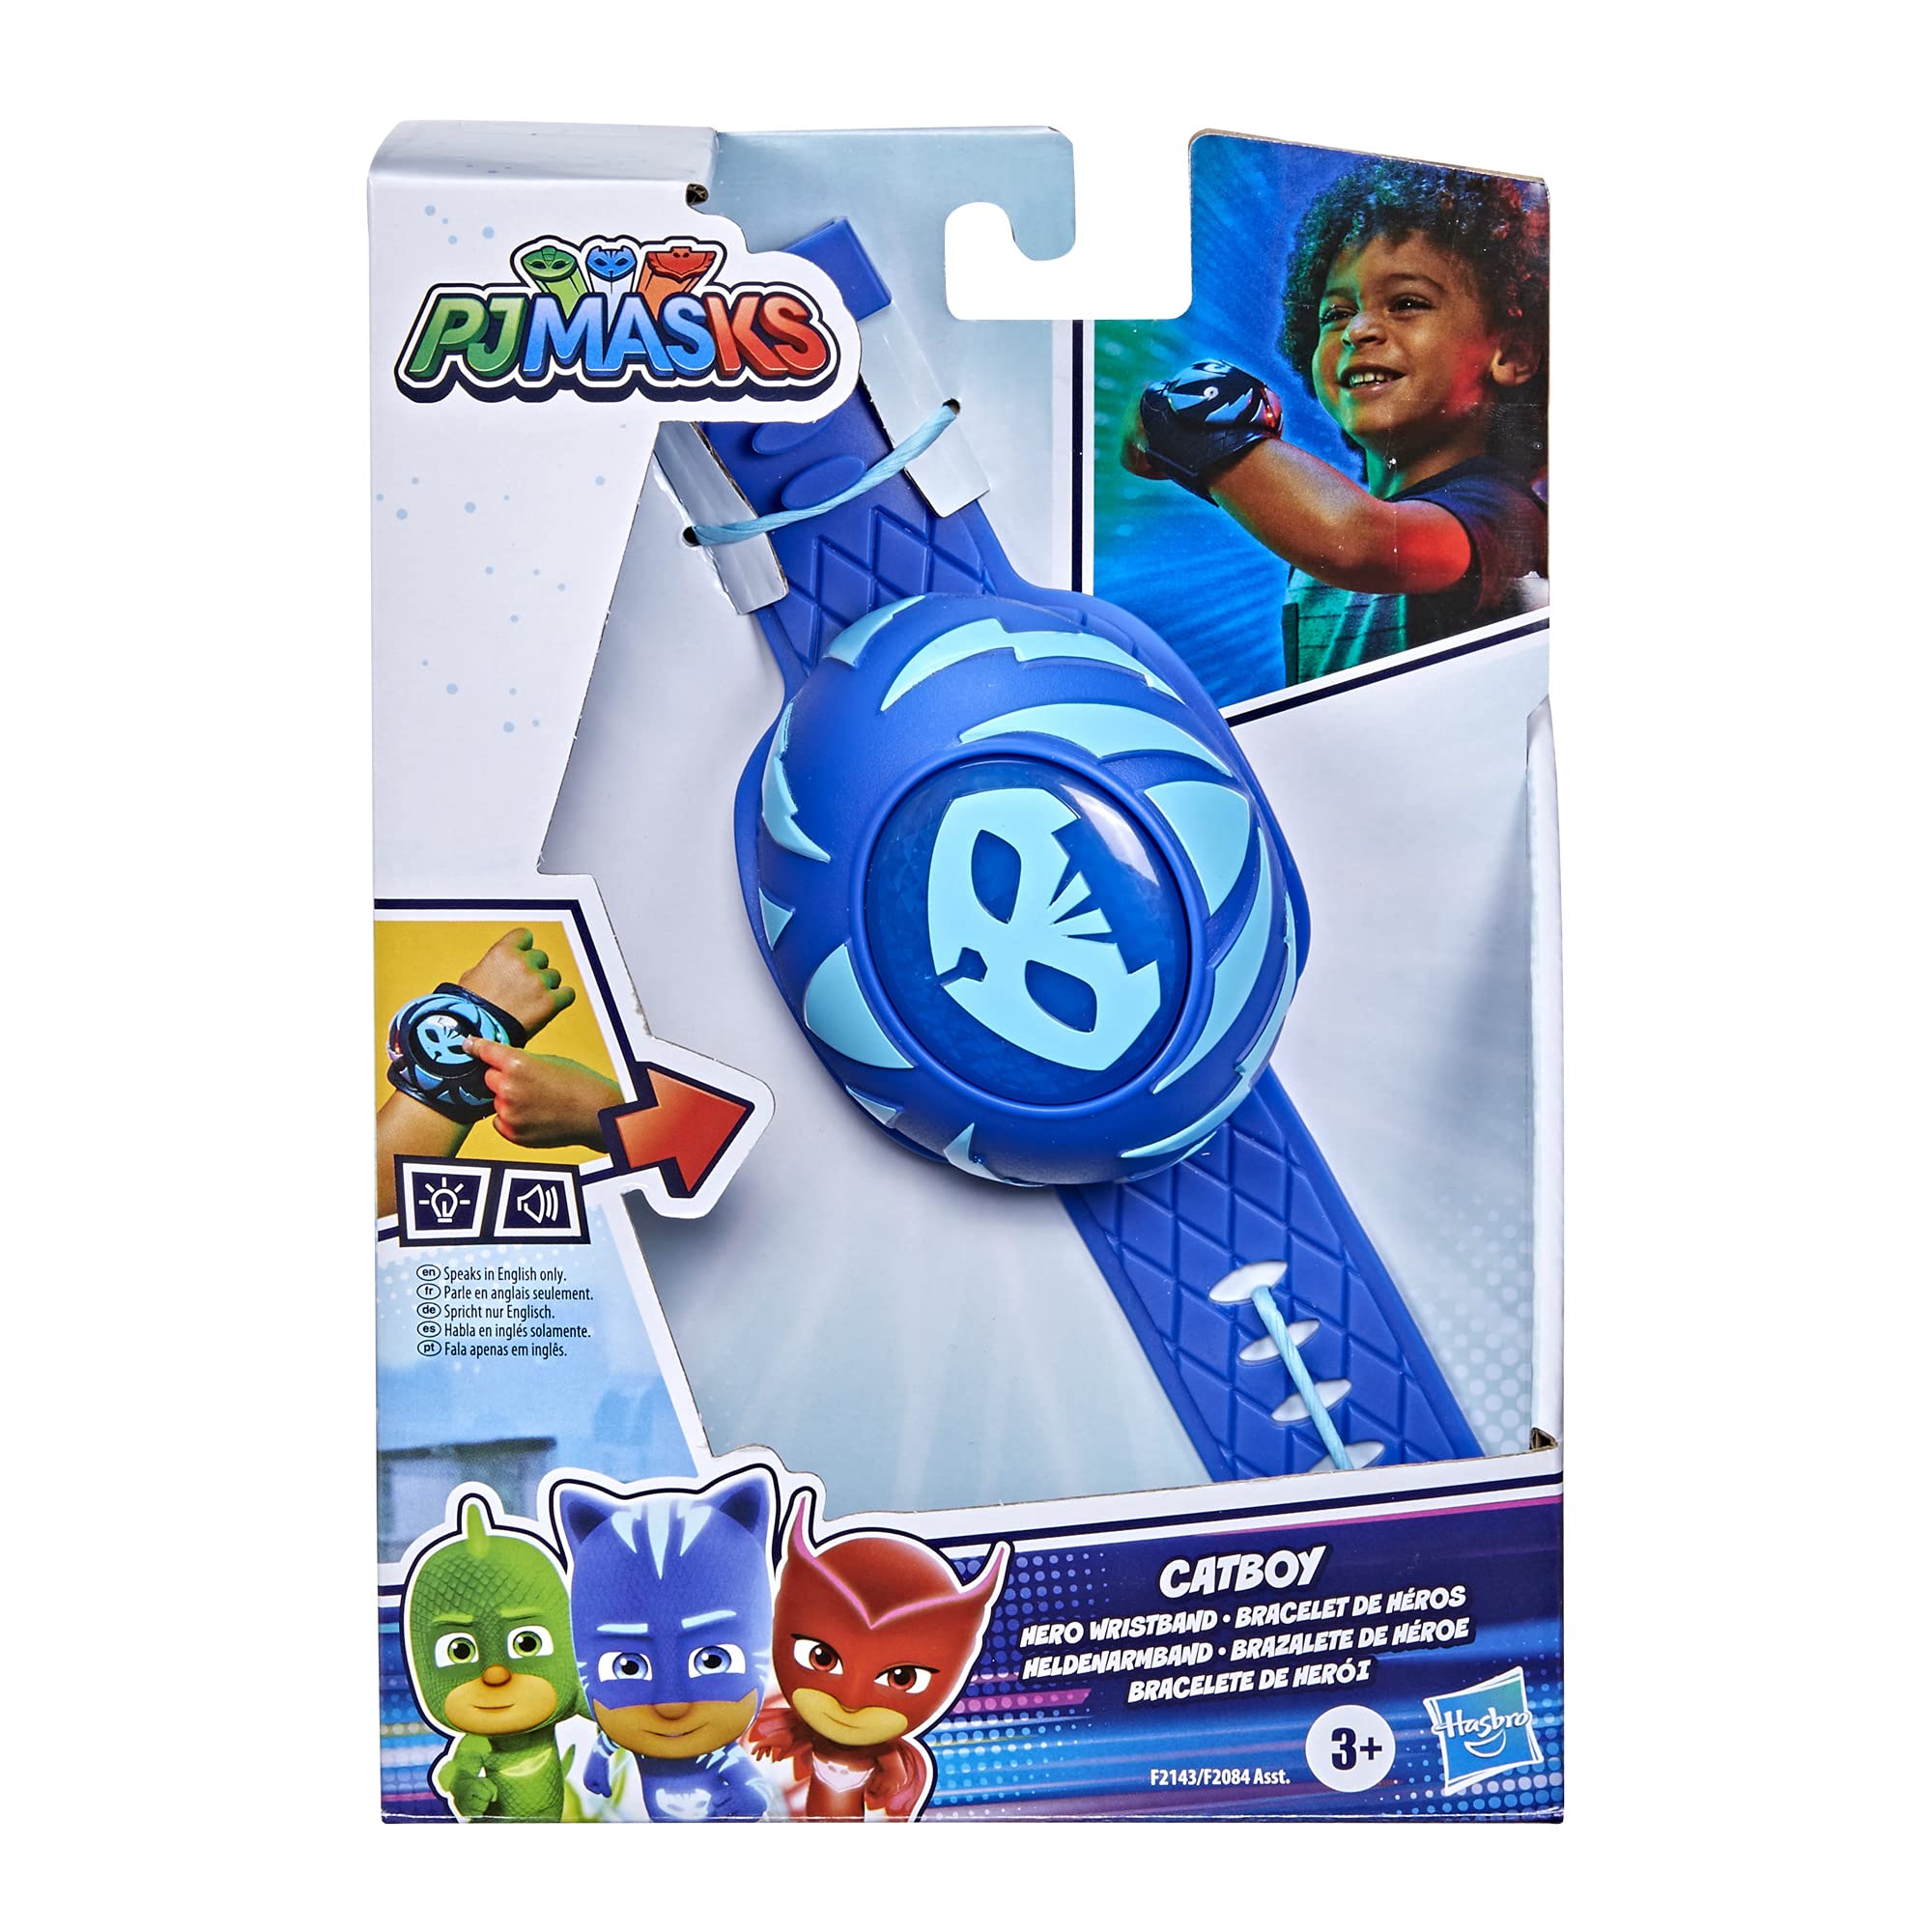 PJ Masks Catboy Power Wristband Preschool Toy, Costume Wearable with Lights and Sounds for Kids Ages 3 and Up, Blue, 14 Different Sound Effects, Standard Packaging